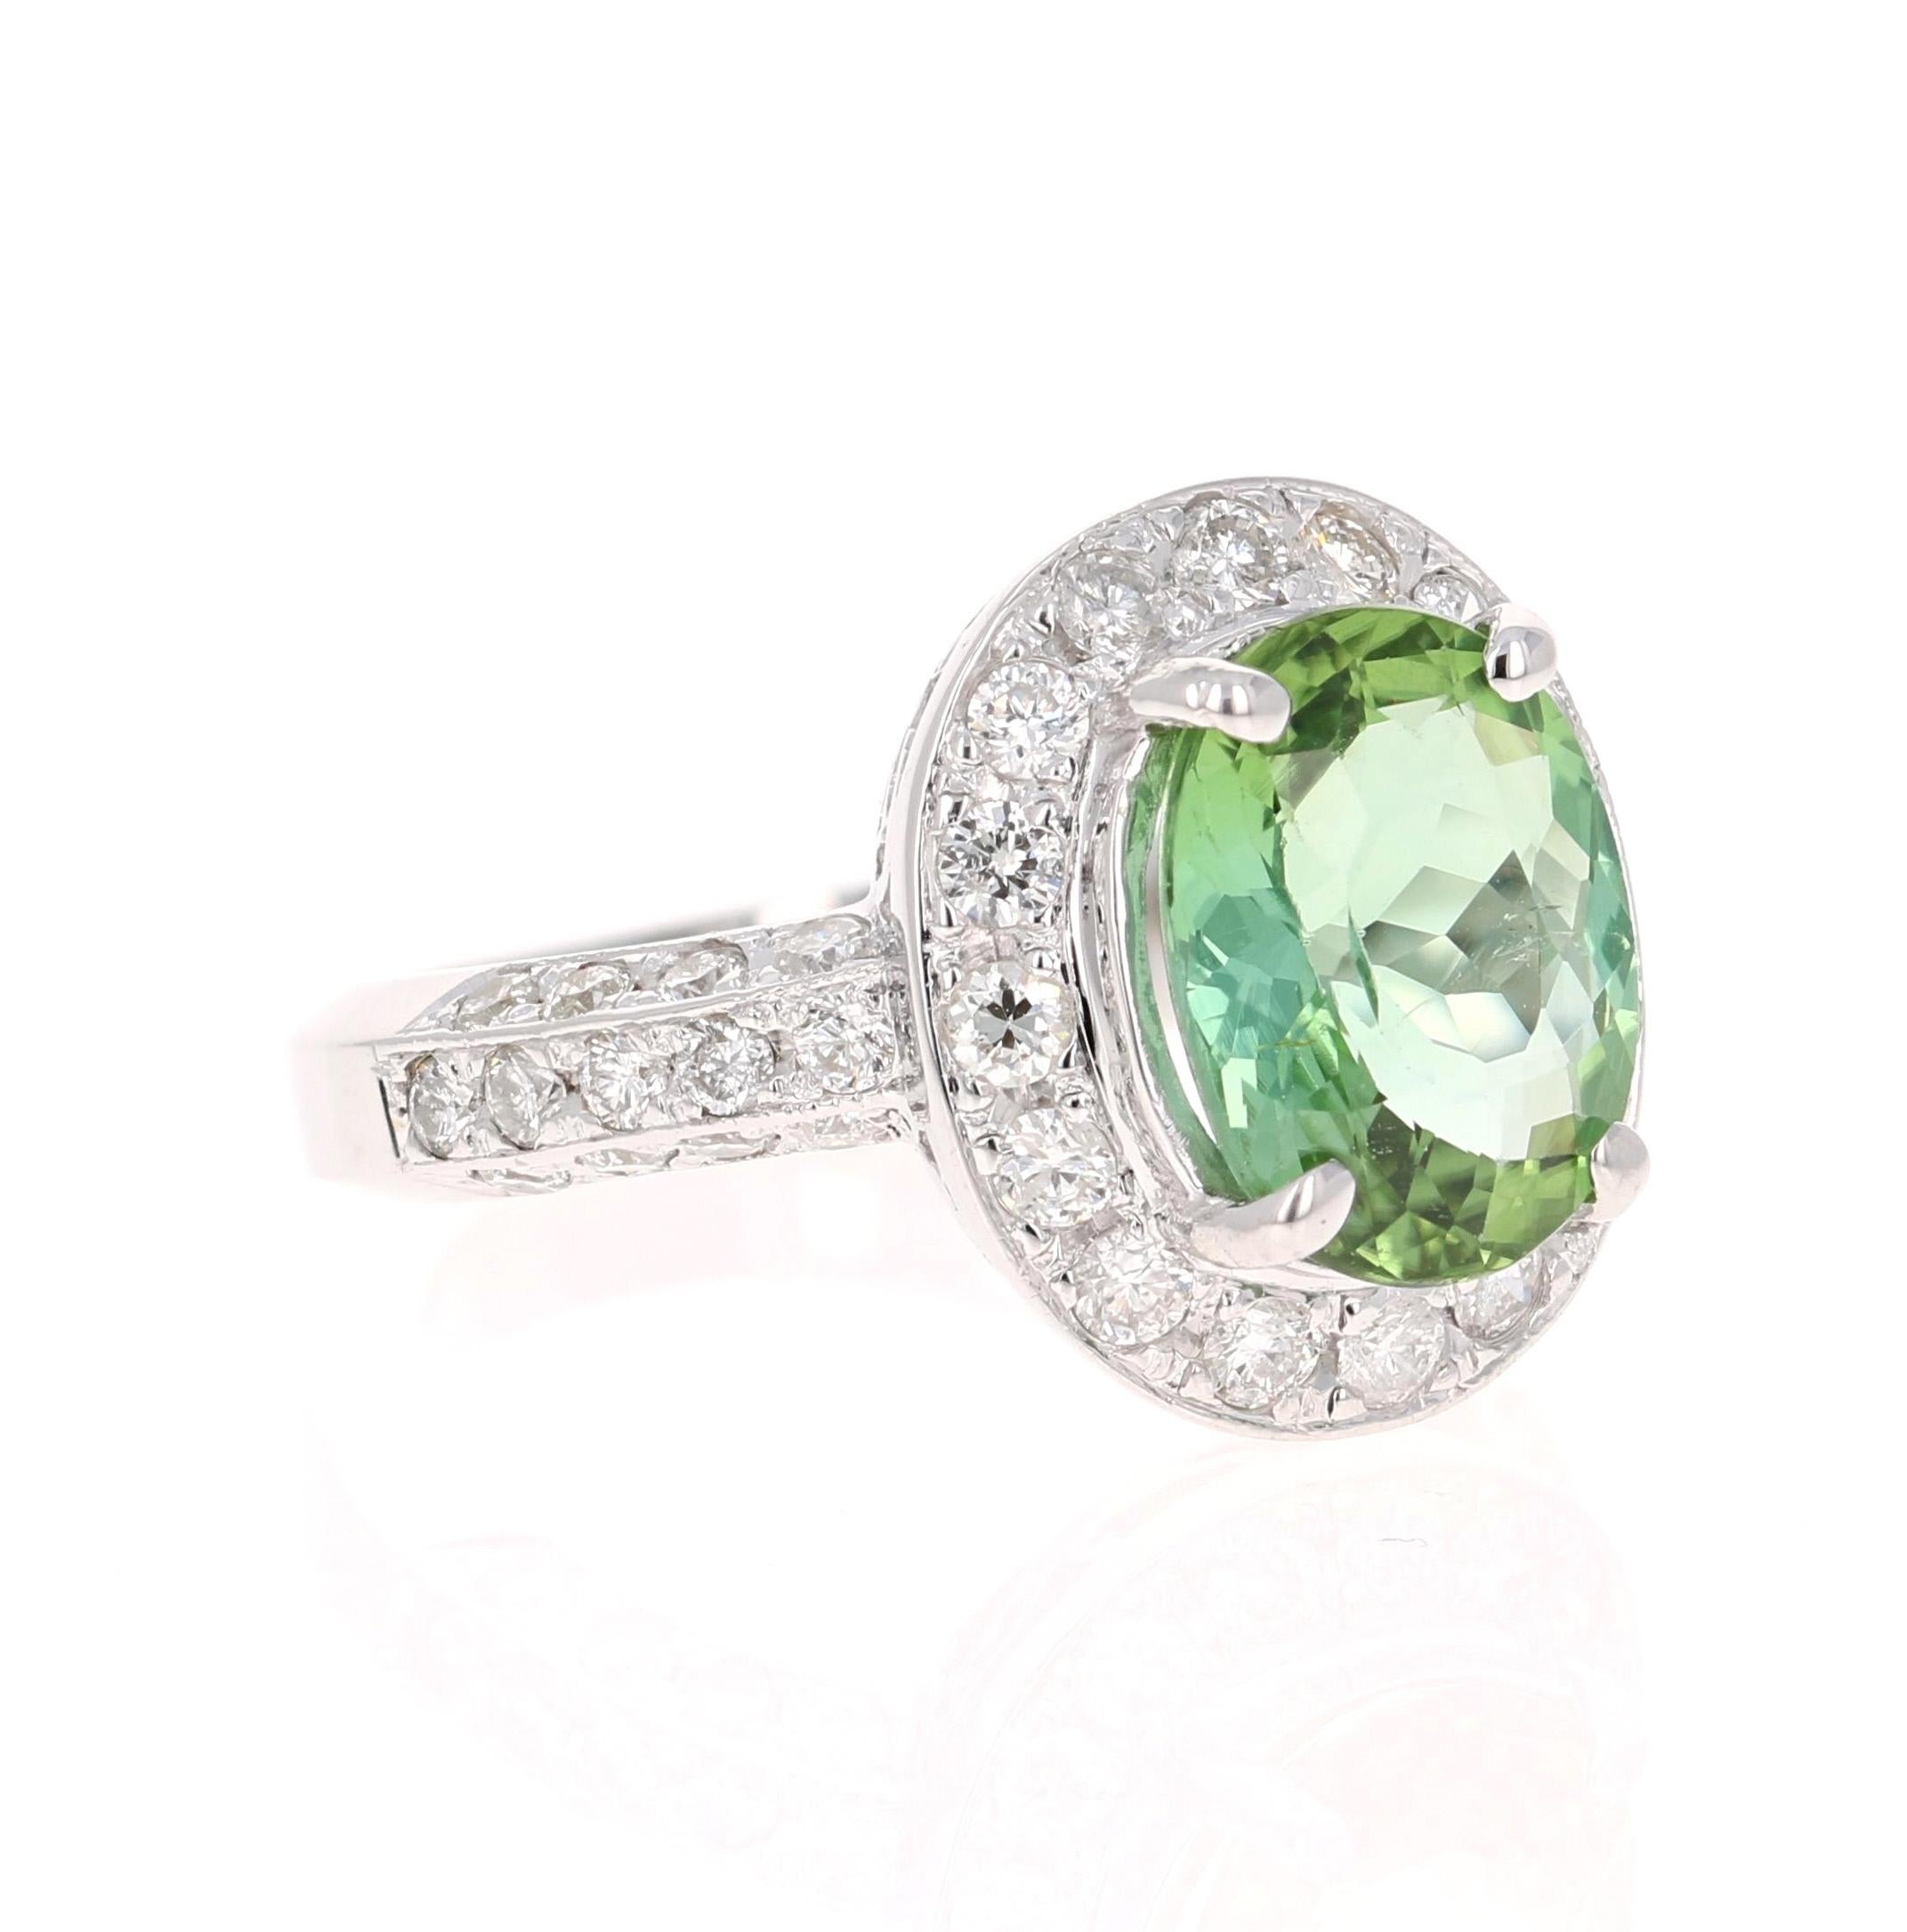 This stunner has a gorgeous Oval Cut leafy Mint Green Tourmaline that weighs 3.16 Carats. Surrounding the tourmaline are 42 Round Cut Diamonds that weigh 1.11 Carats. The Clarity and Color are SI-F.

The measurements of the oval tourmaline are 8 mm